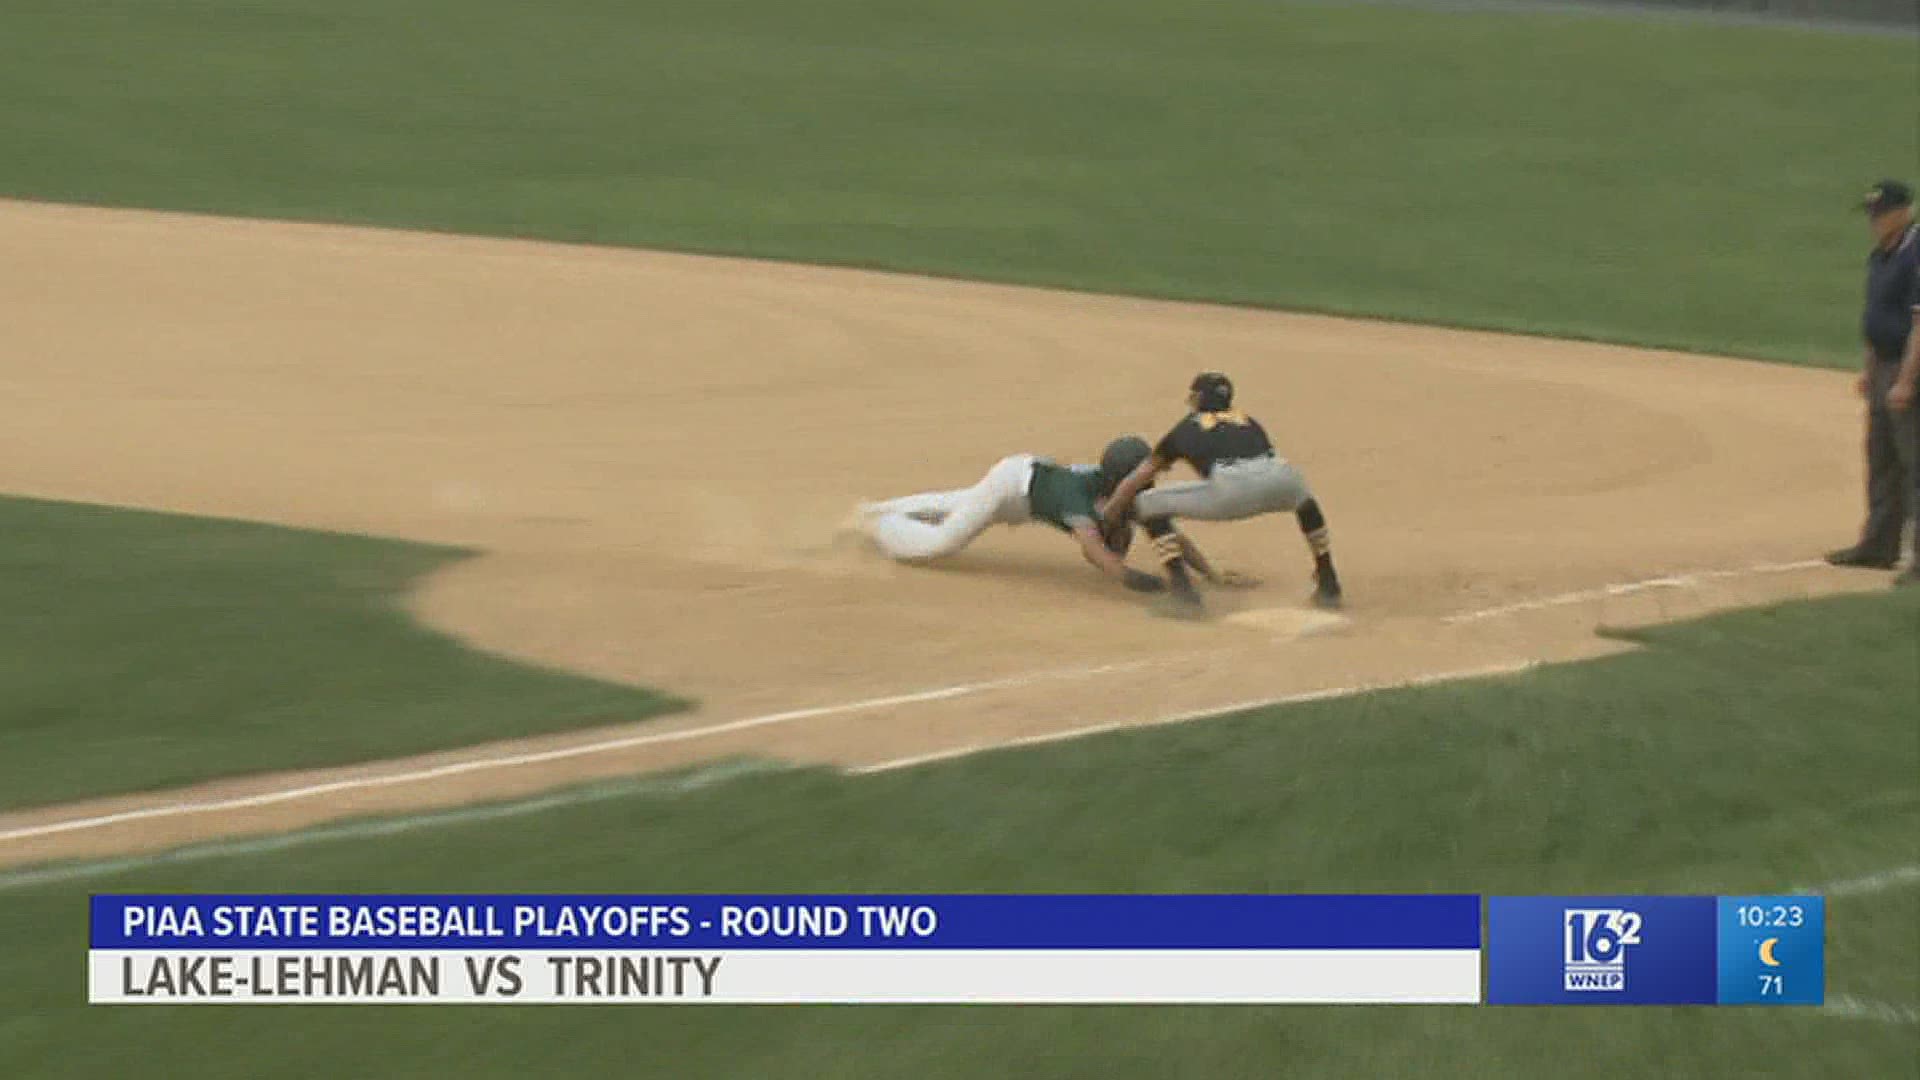 Lake-Lehman shut out Trinity 2-0 in the State Baseball playoffs.